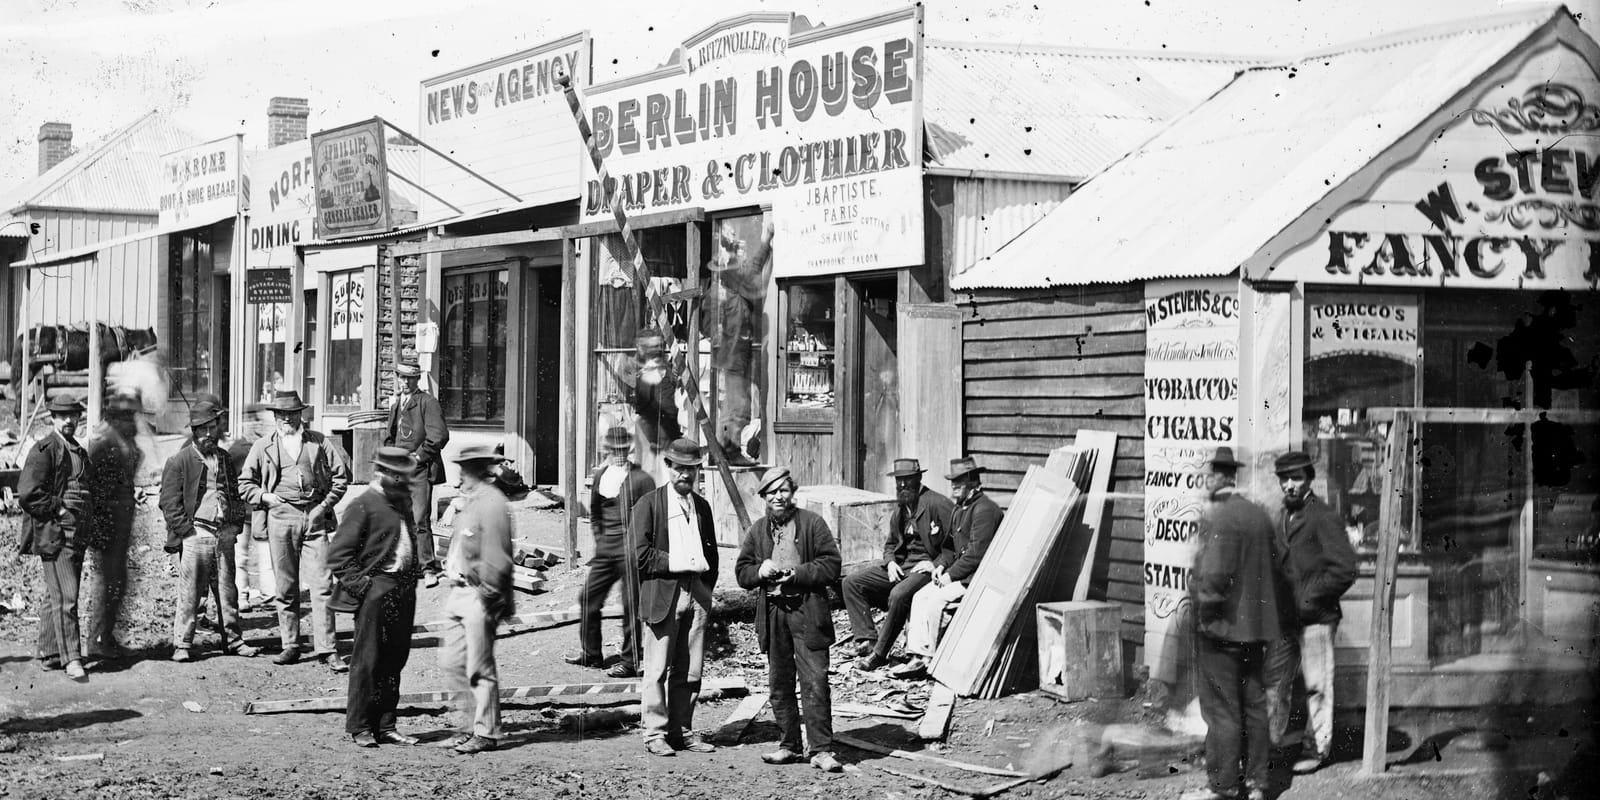 Row of wooden structures housing commercial premises and adorned with hand-painted signs. A number of men are posing of a photo on the rough dirt road in front.